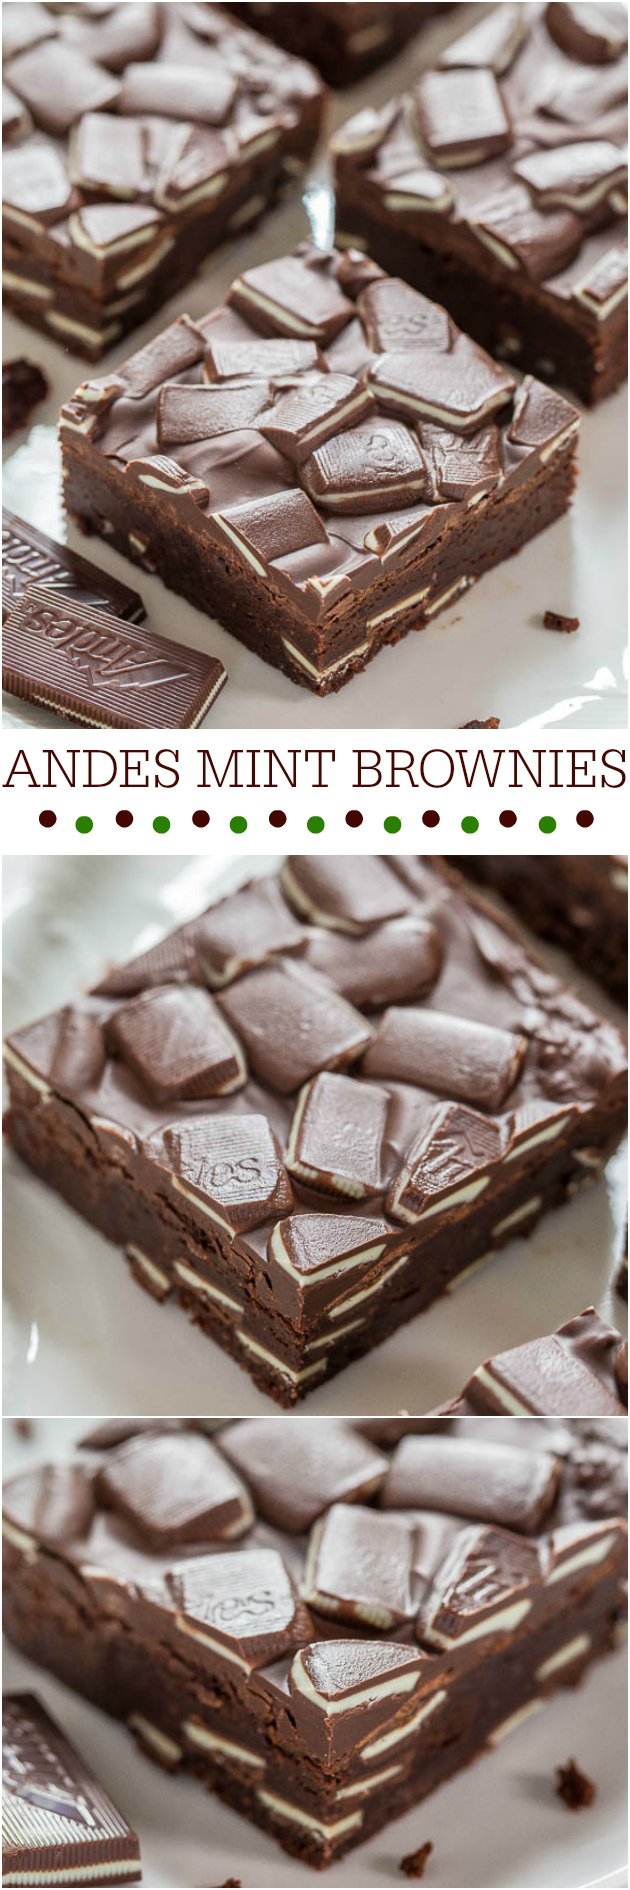 Andes Mint Brownies - Super fudgy brownies loaded with Andes! Chocolate + mint is the best! Meet your new favorite brownies and so easy!!